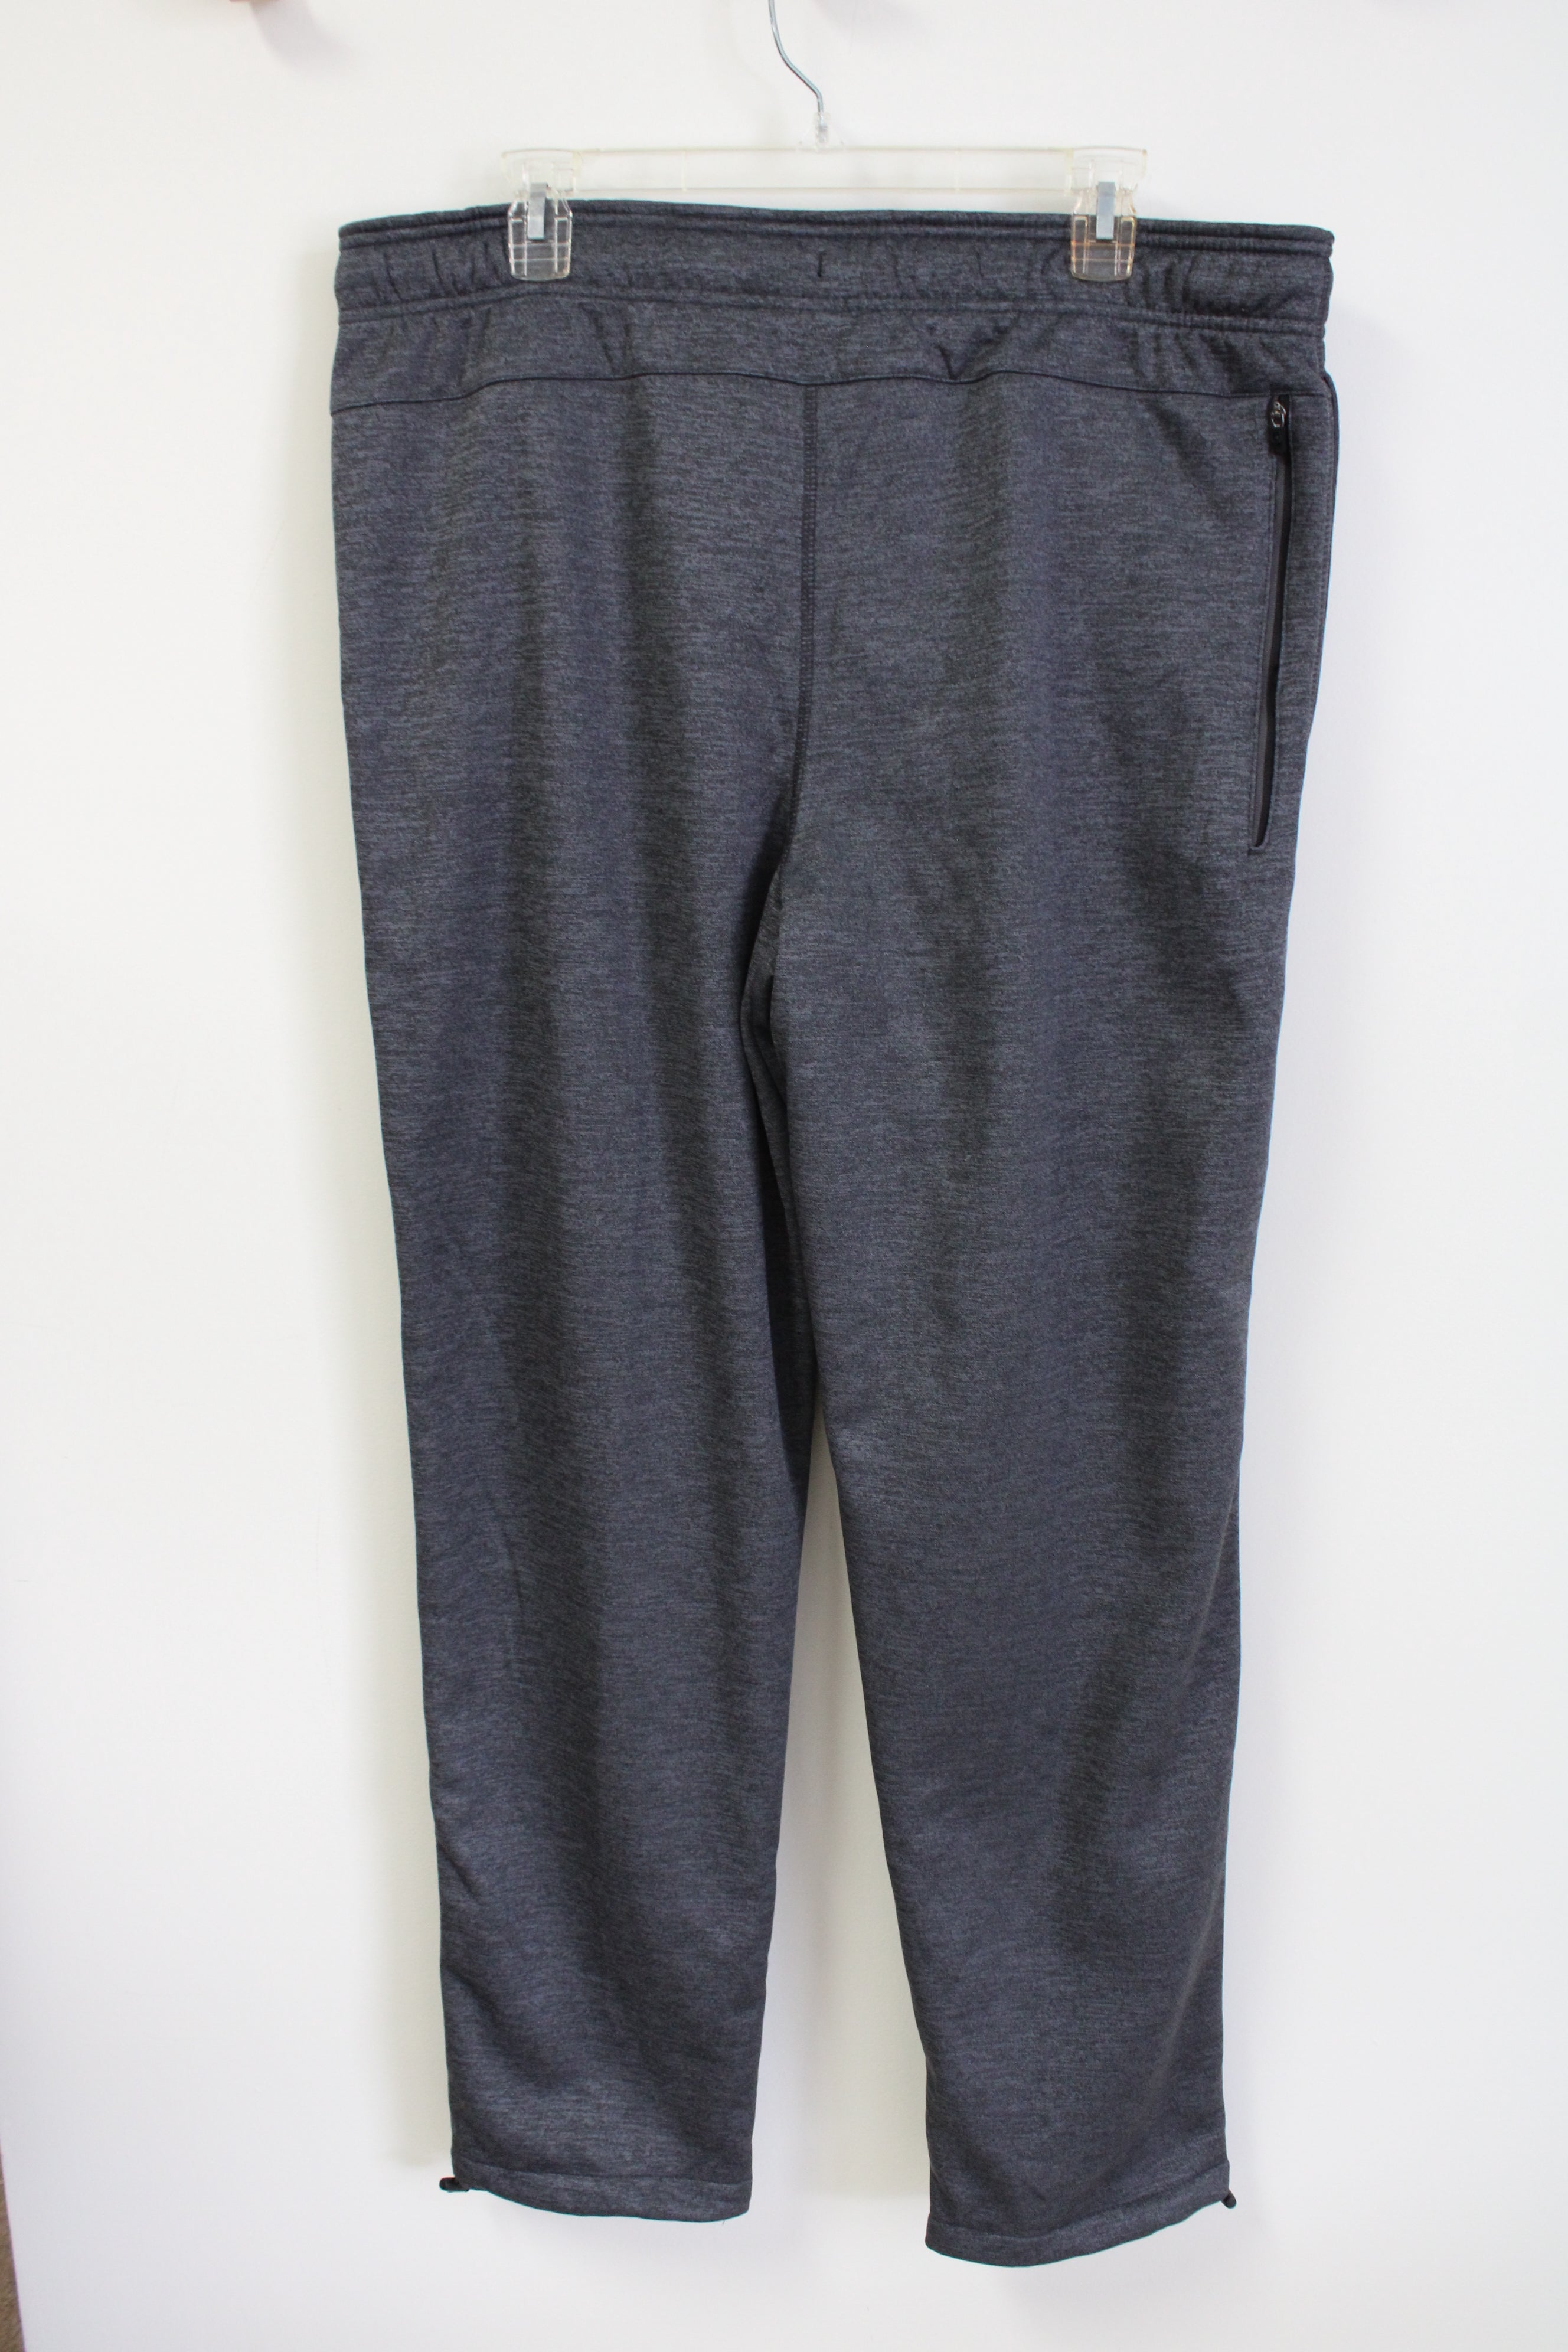 AND1 Gray Fleece Lined Athletic Pants | L